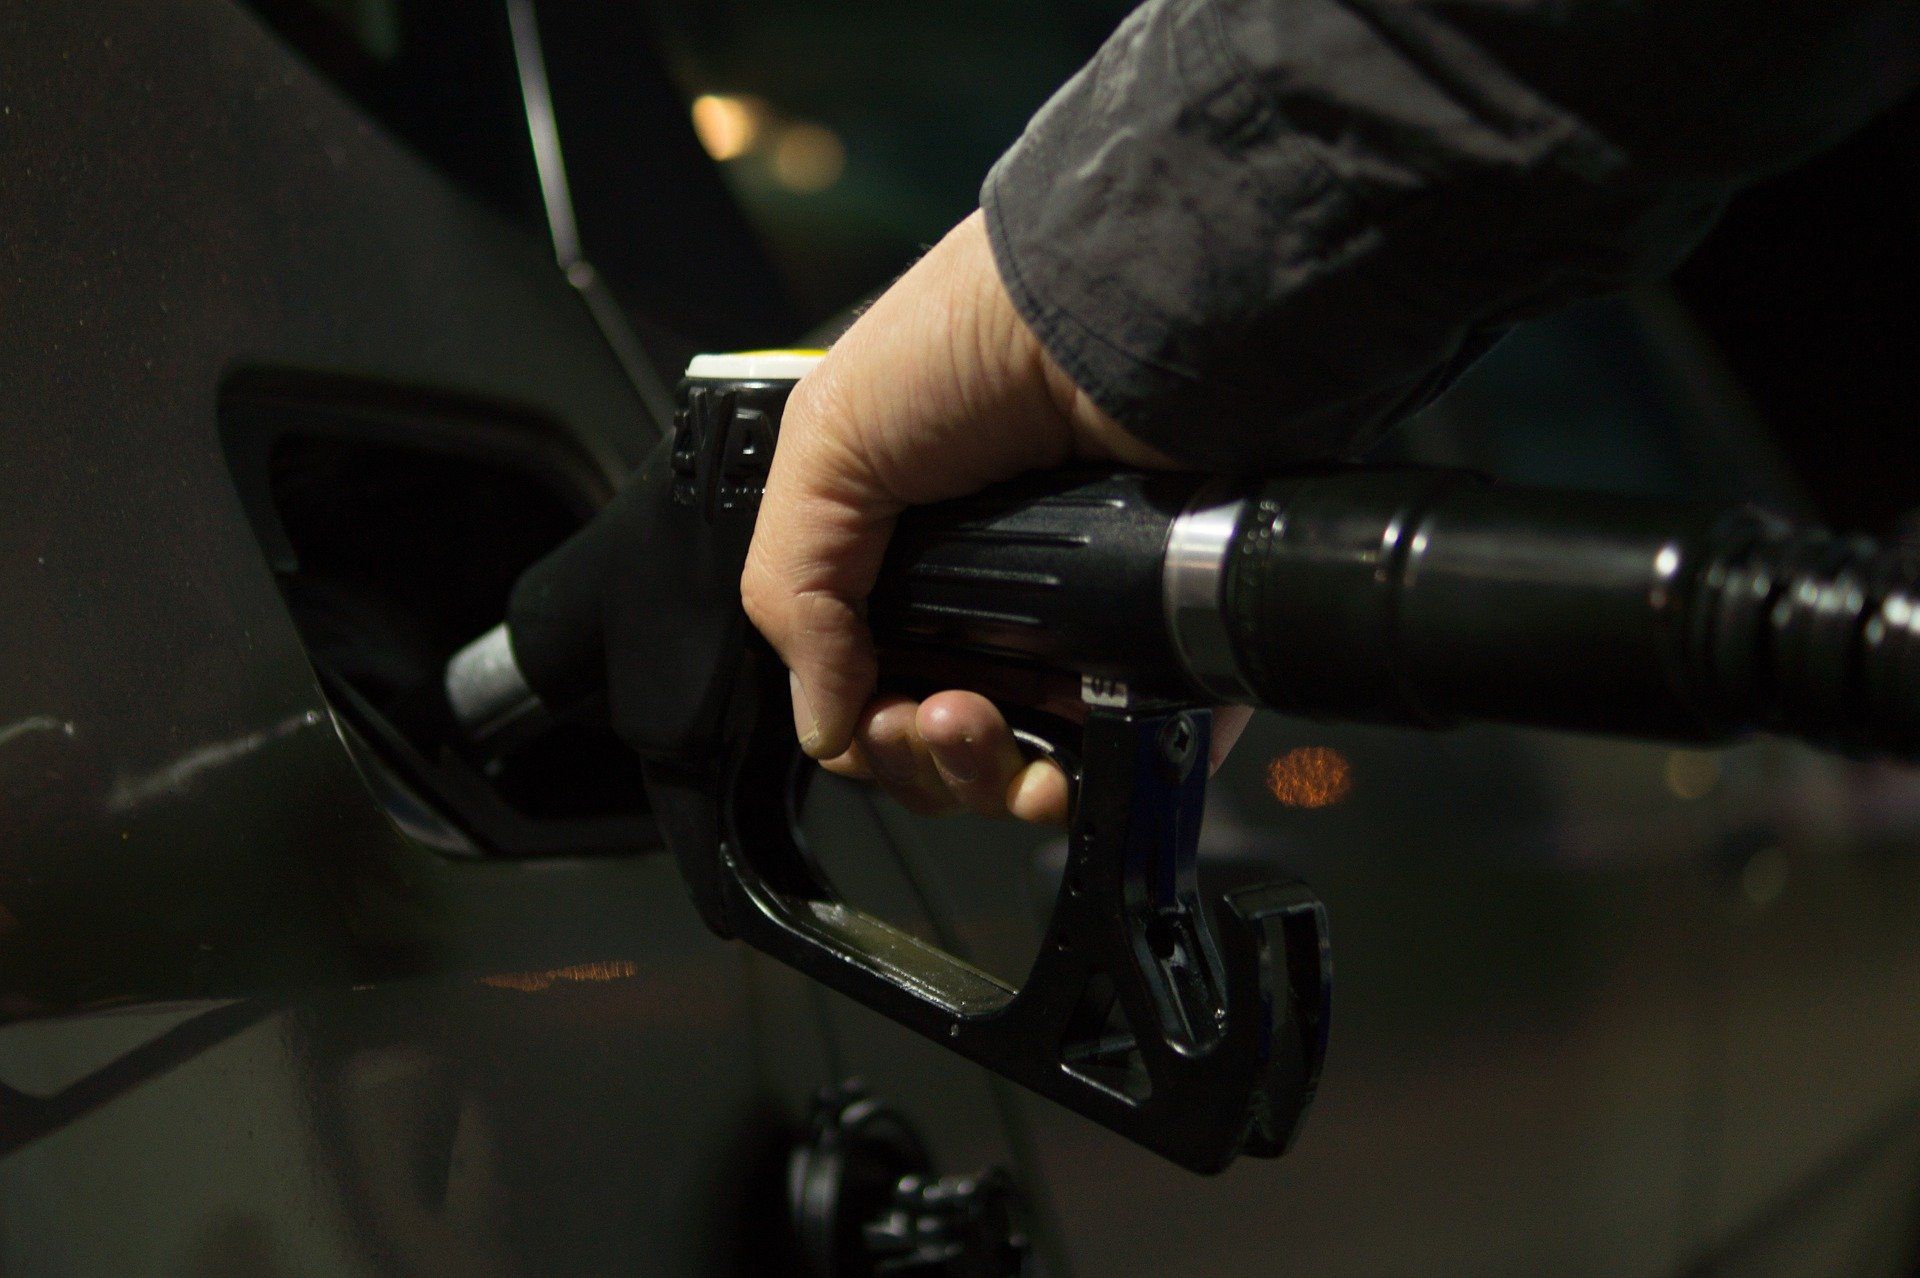 Fuel Price today: Petrol priced at Rs 95.41, diesel Rs 86.67 in Delhi on December 14